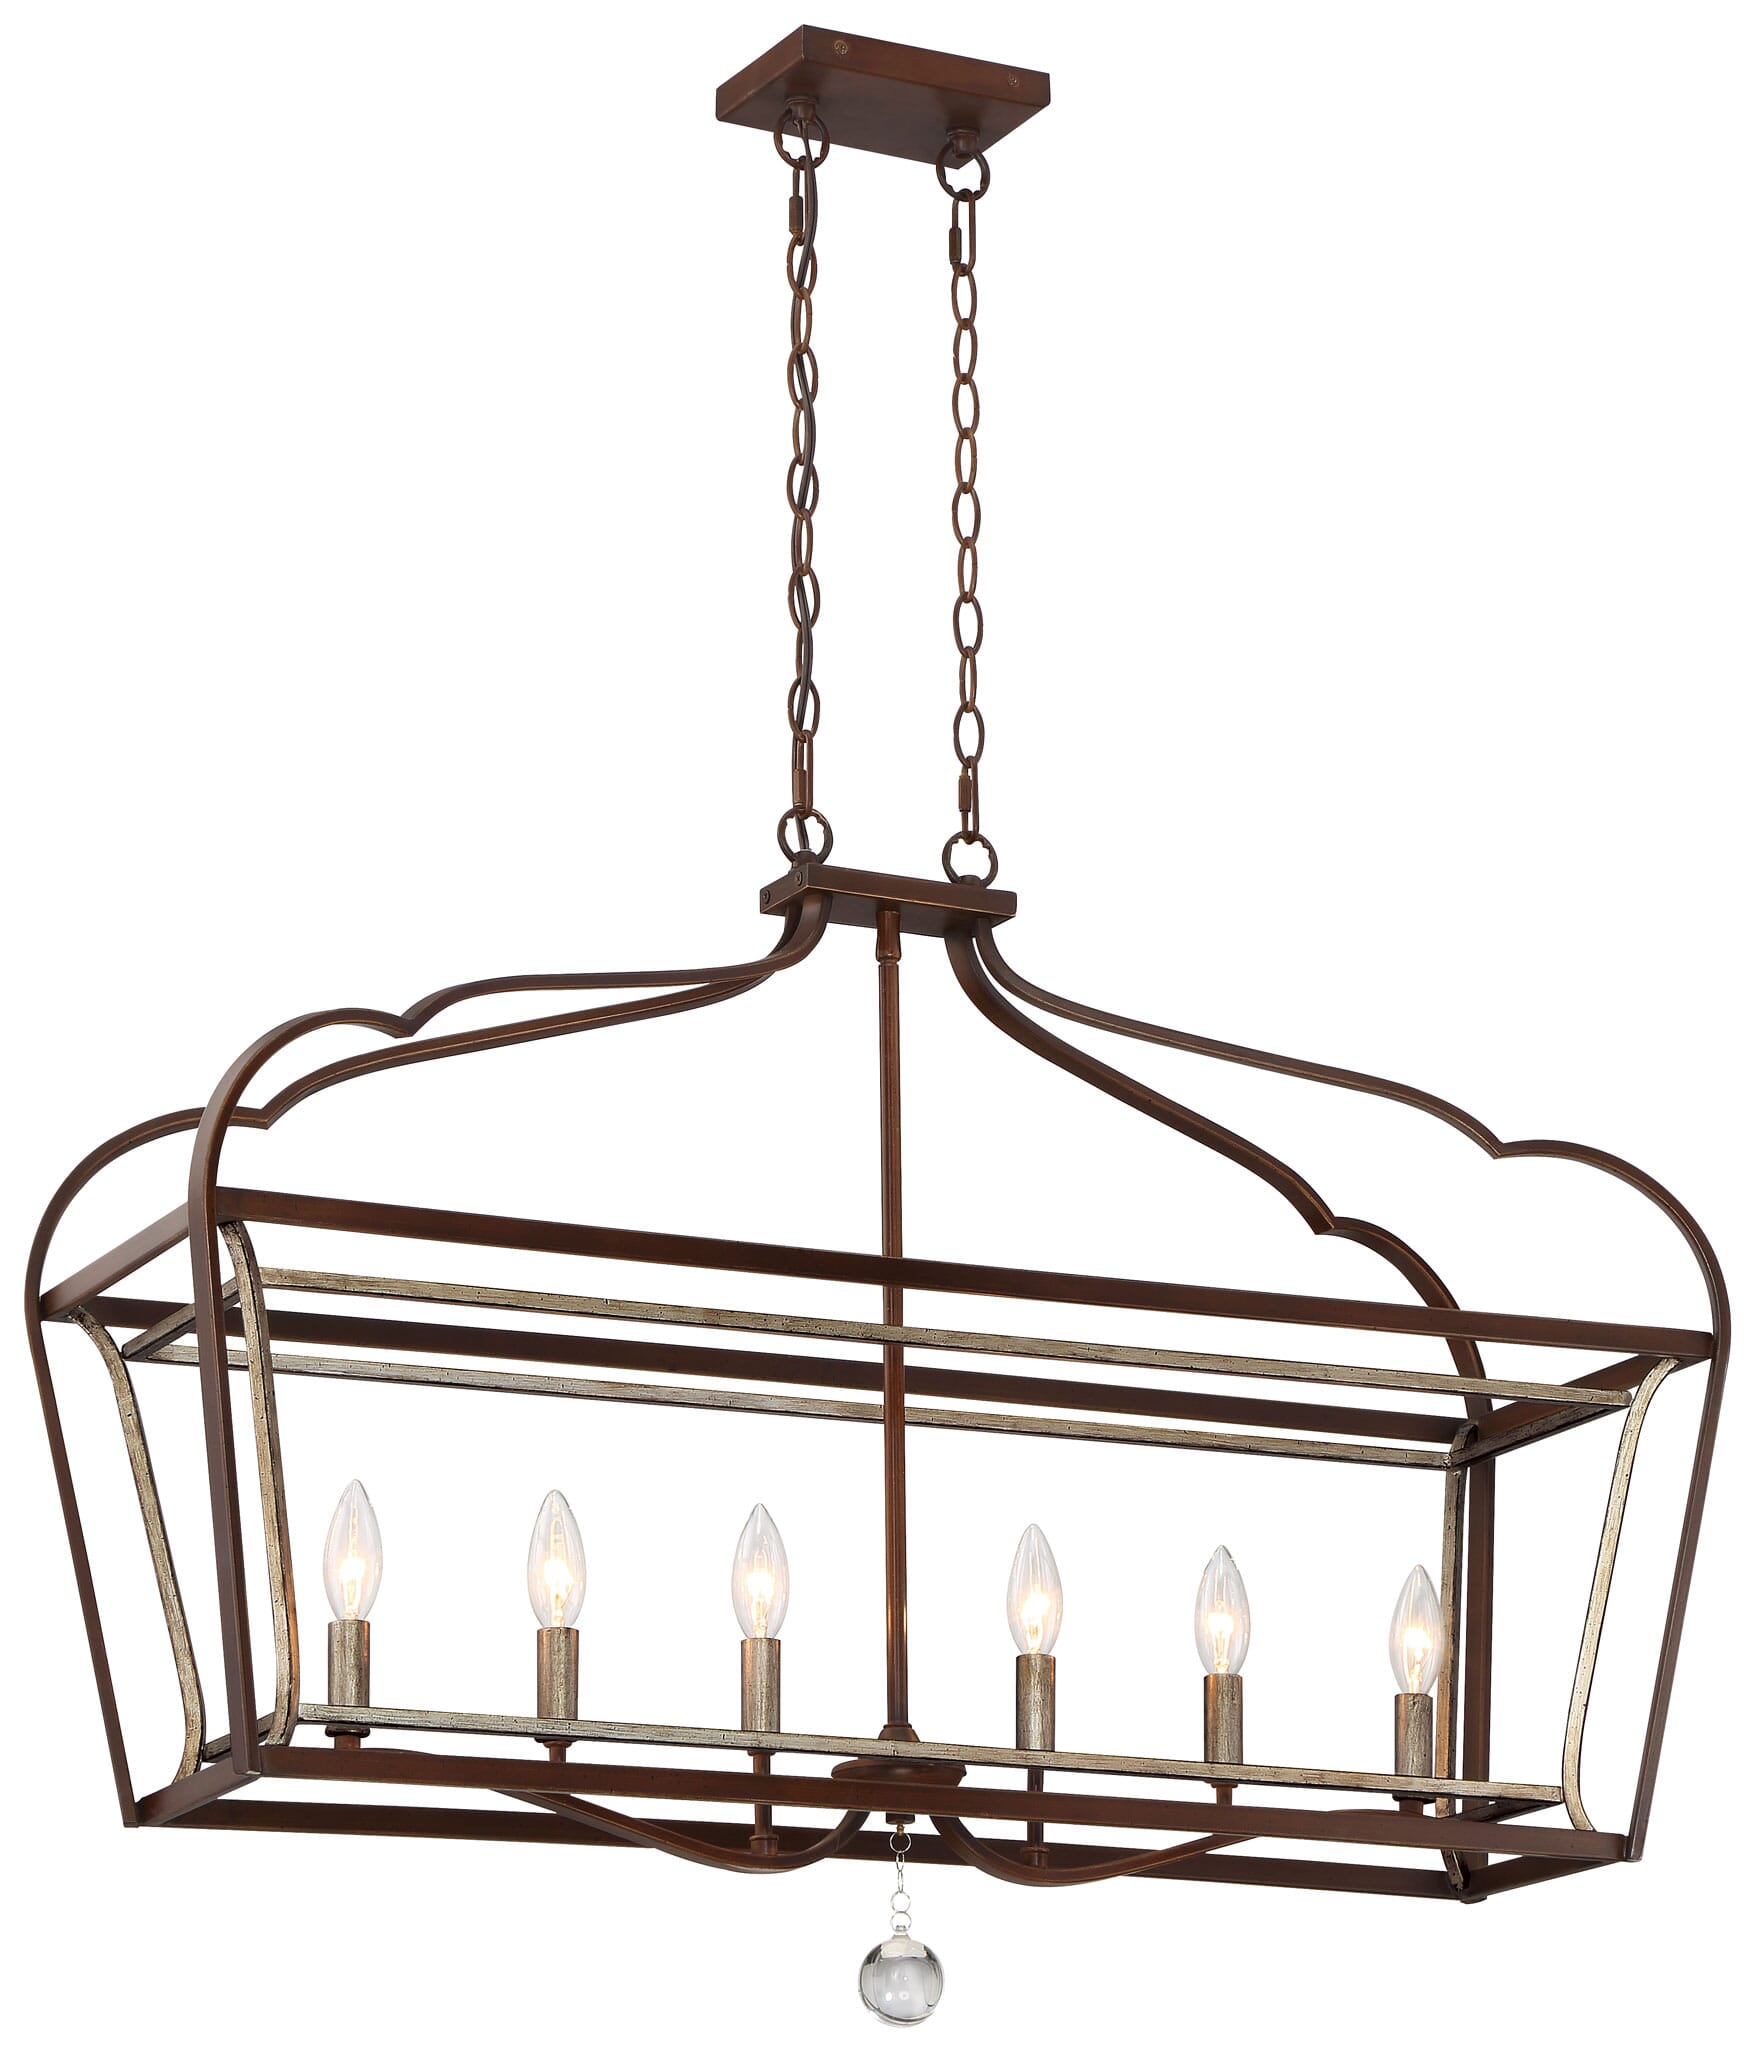 Astrapia 6-Light 11"" Pendant Light in Dark Rubbed Sienna with Aged Silver -  Minka Lavery, 4346-593